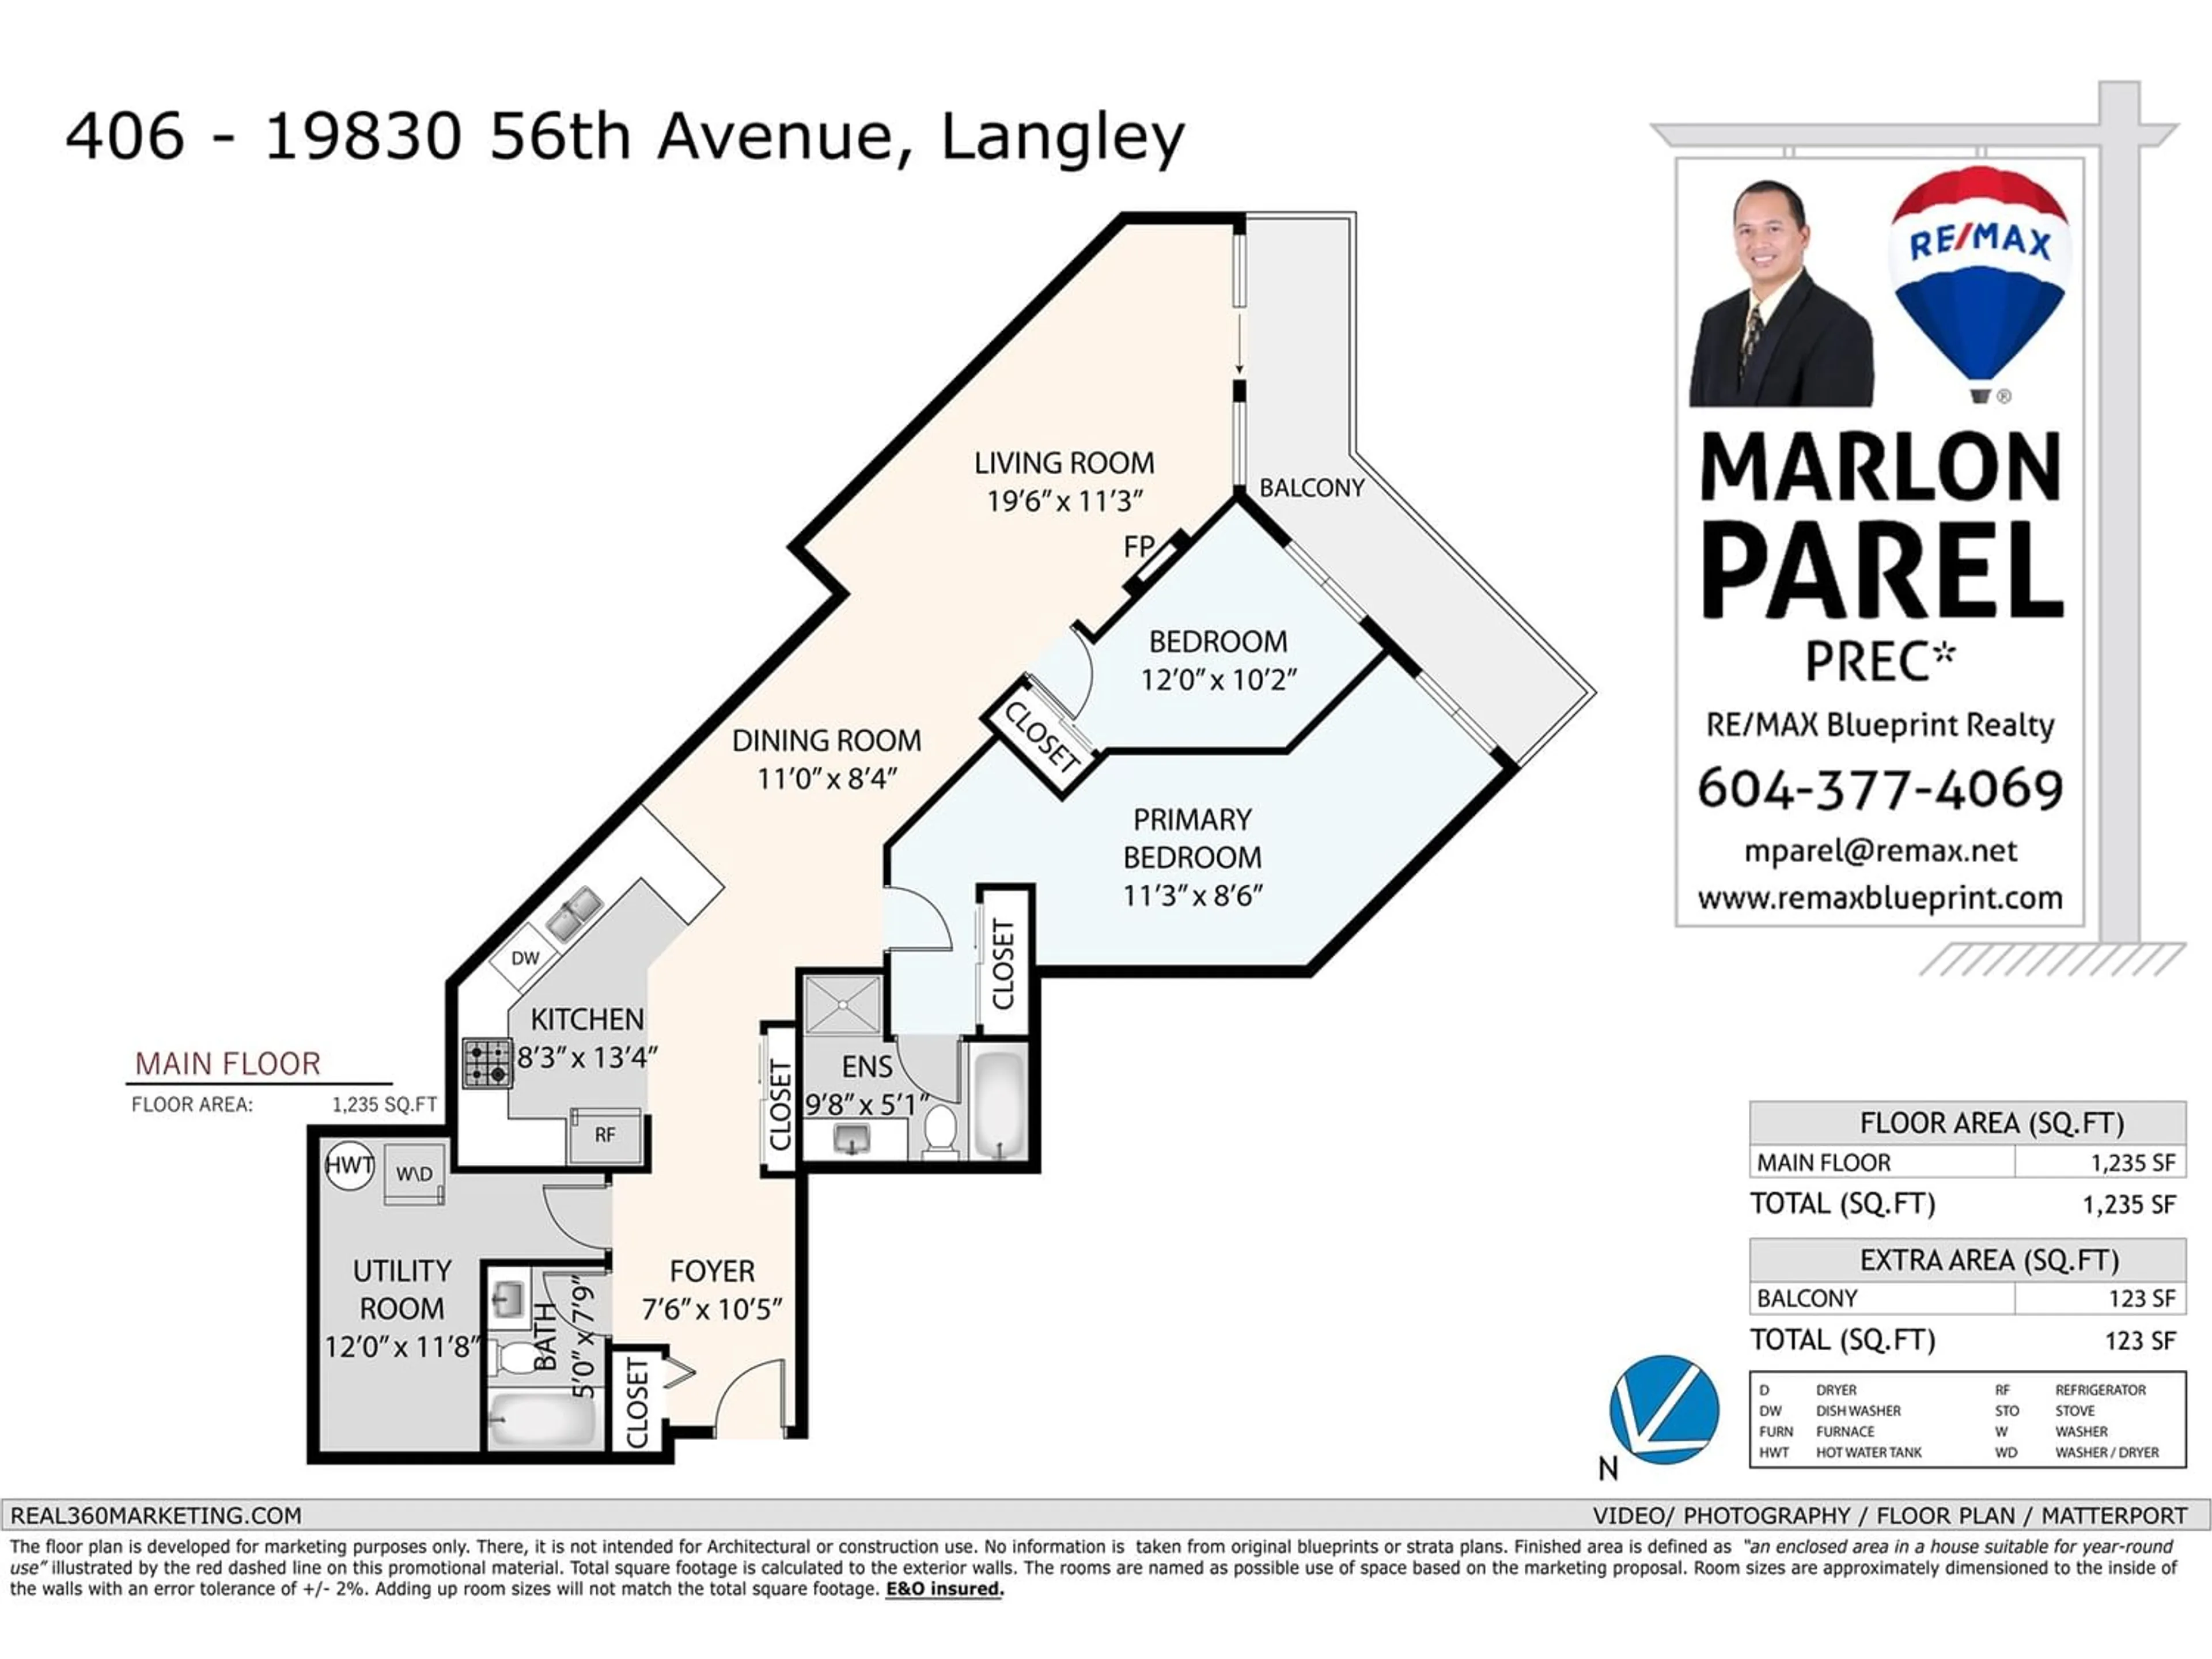 Floor plan for 406 19830 56 AVENUE AVENUE, Langley British Columbia V3A0A5